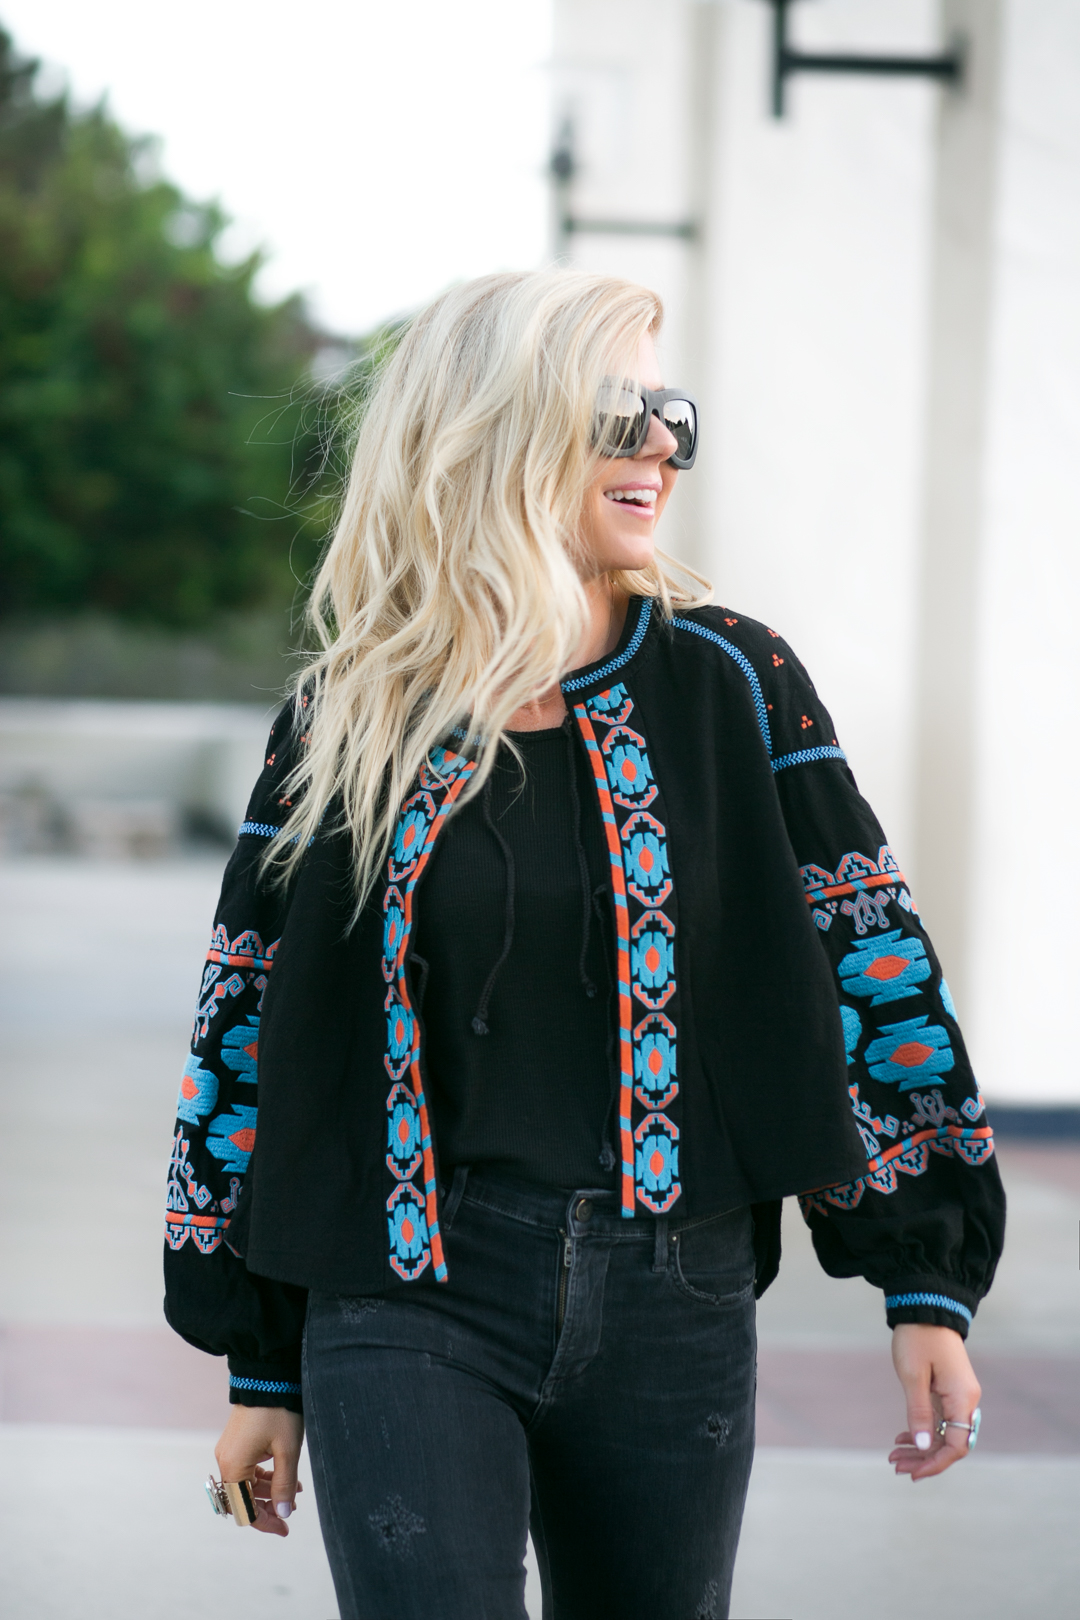 lisa allen of lunchpails and lipstick wearing a Free People embroidered swing jacket with valleywear and chloe booties